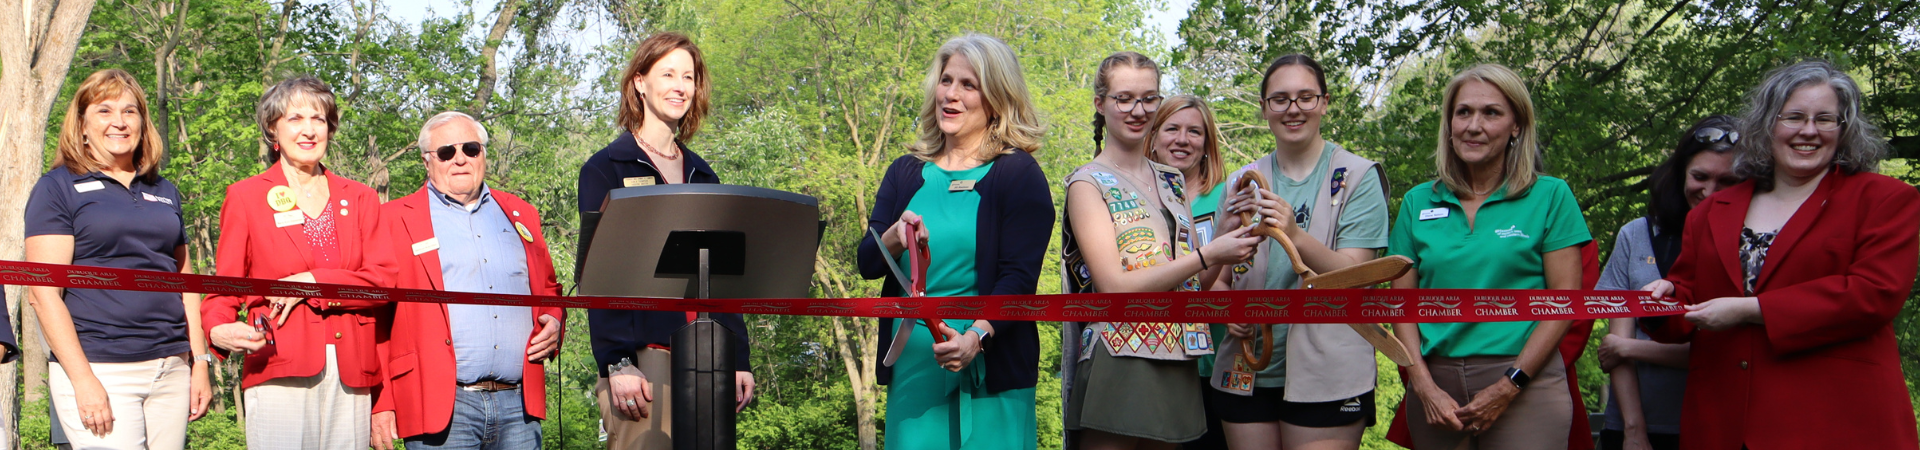  girl scout supporters at a ribbon cutting ceremony 